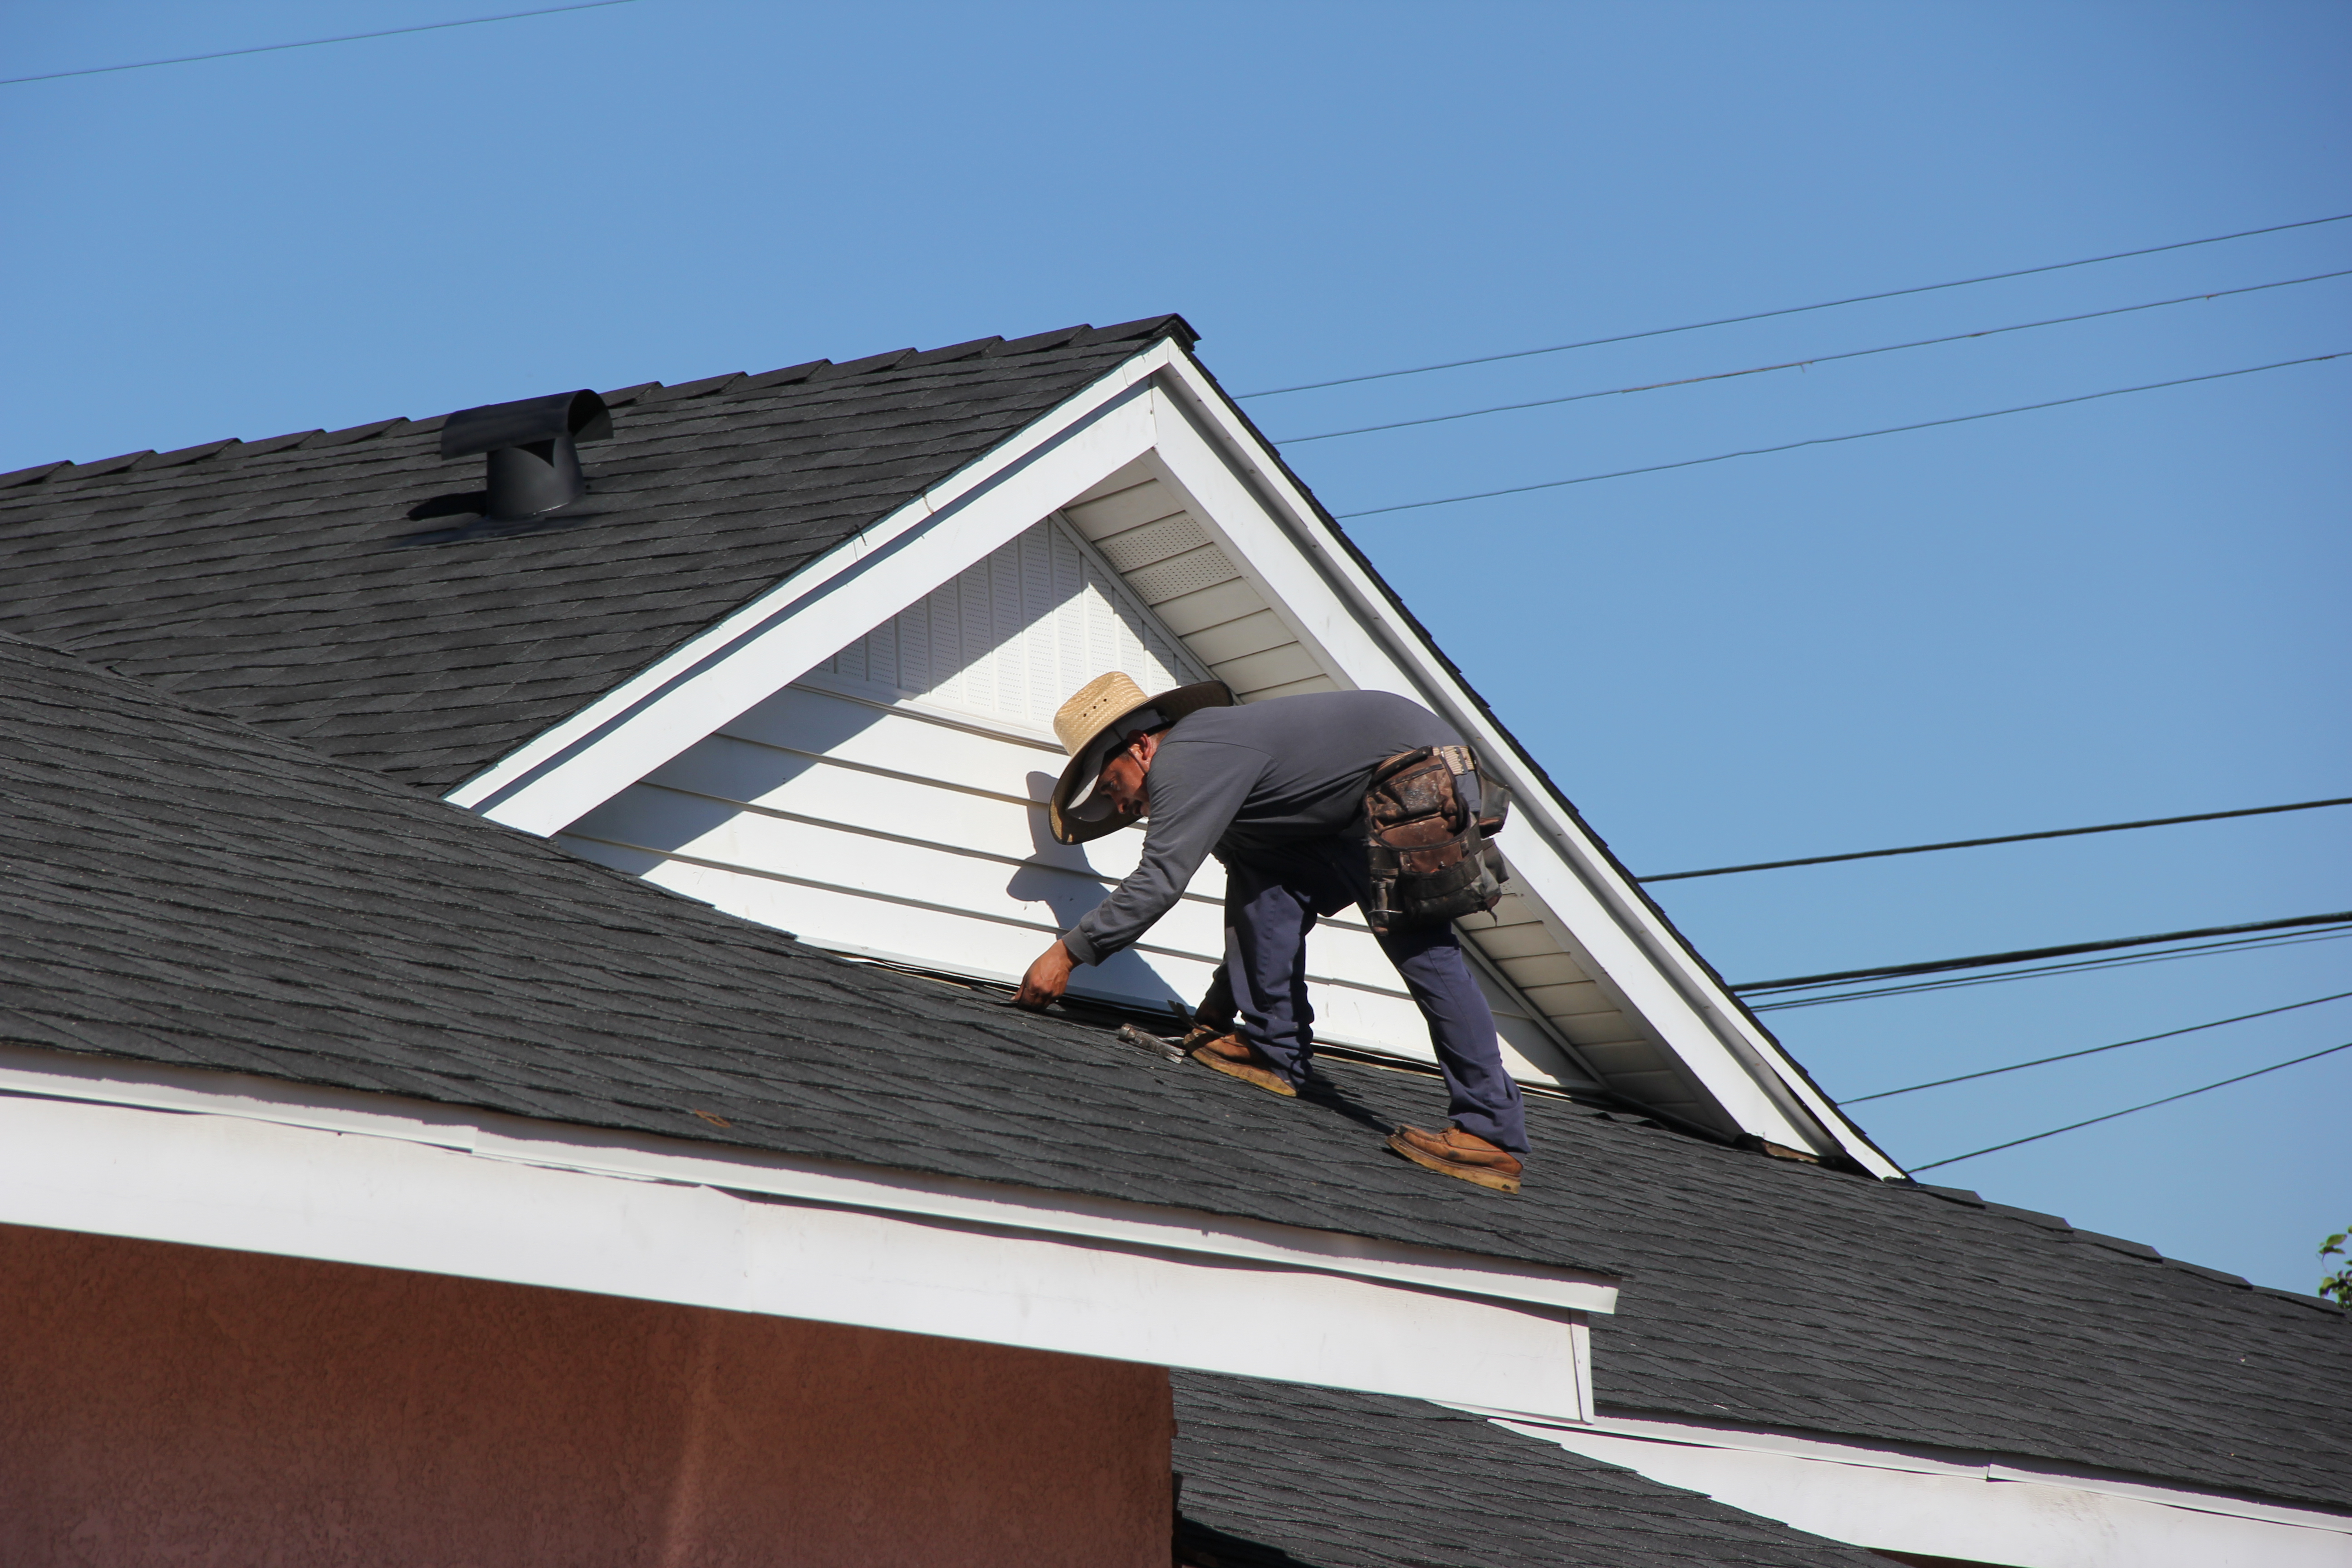 Roof Repair In Nj - If Not Now, When?